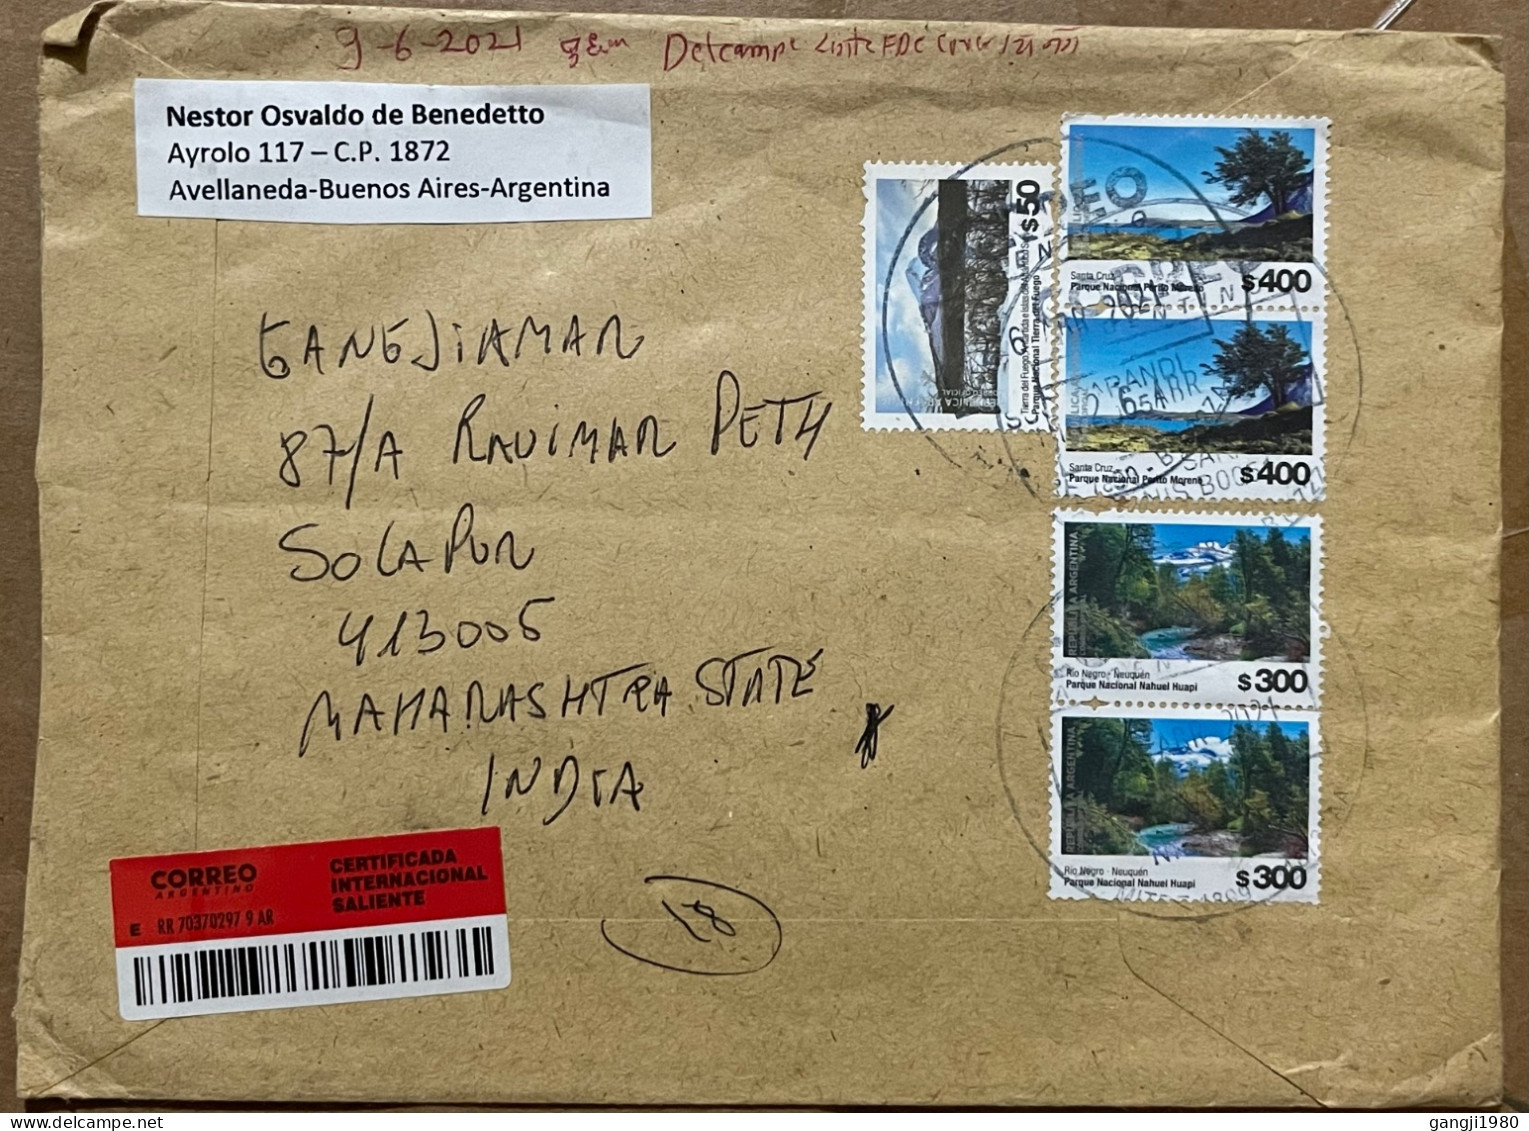 ARGENTINA 2021, COVER CORONA EPEDEMIC, REACH AFTER 2 MONTH, REO NEGRO & SANTA CRUZ MOUNTAIN, NATURE, WATER, PARK, USED T - Briefe U. Dokumente